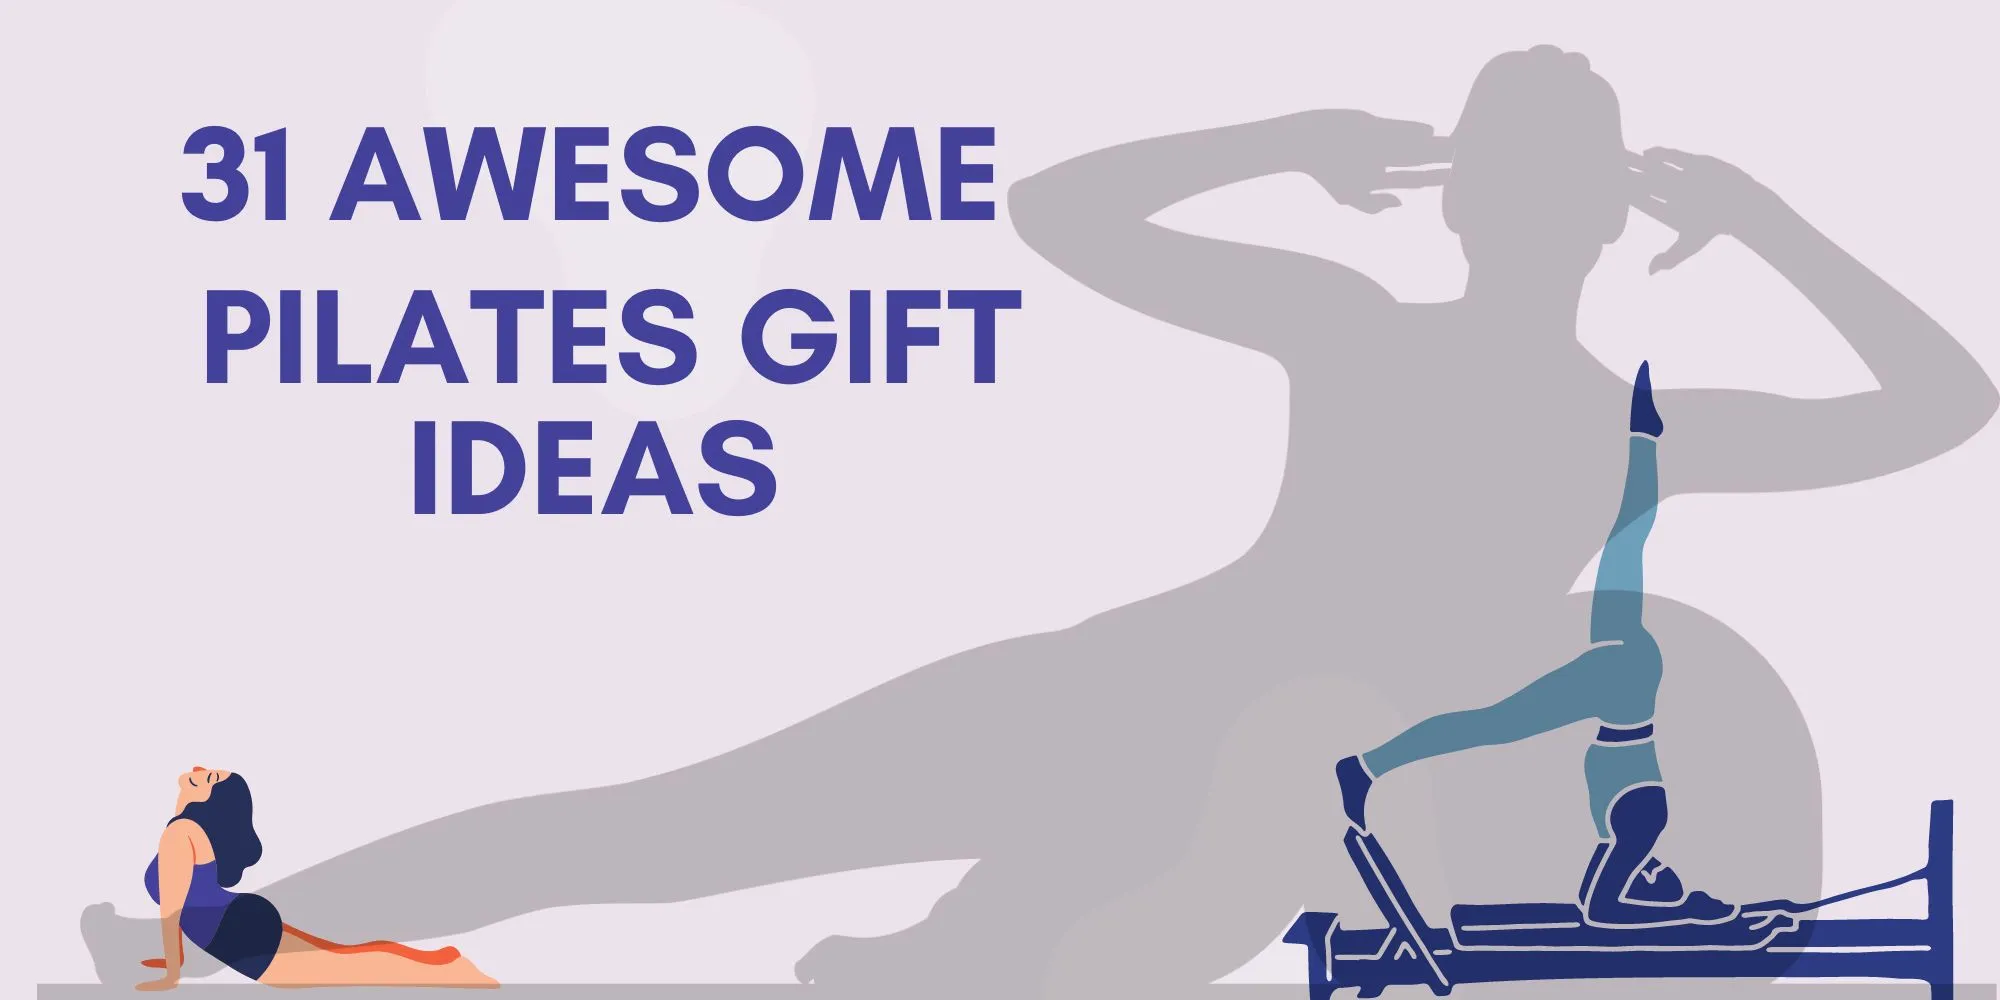 31 Awesome Pilates Gift Ideas